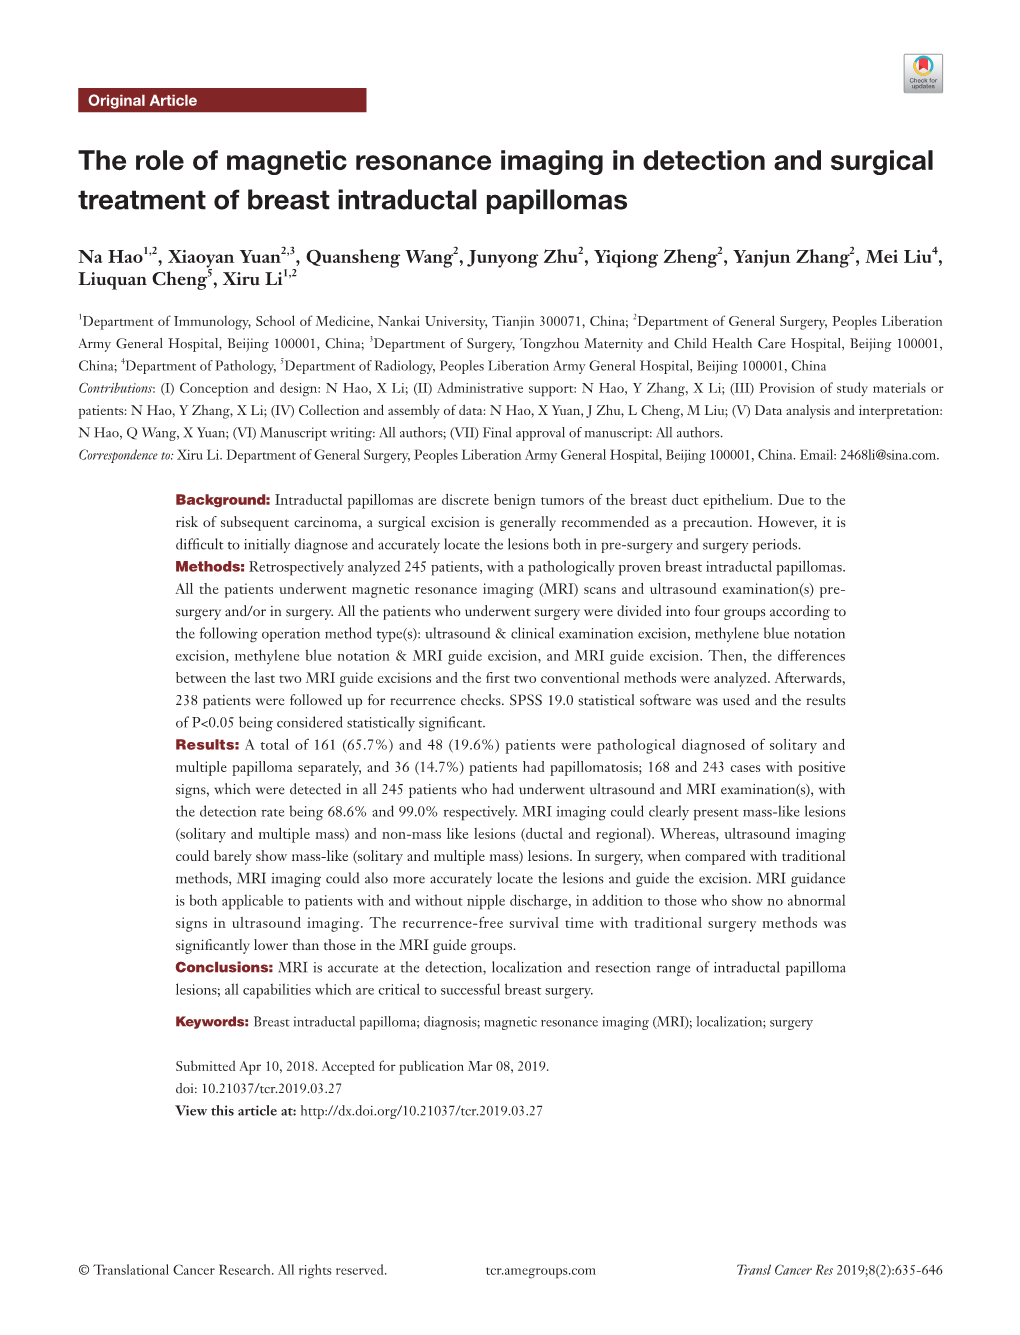 The Role of Magnetic Resonance Imaging in Detection and Surgical Treatment of Breast Intraductal Papillomas